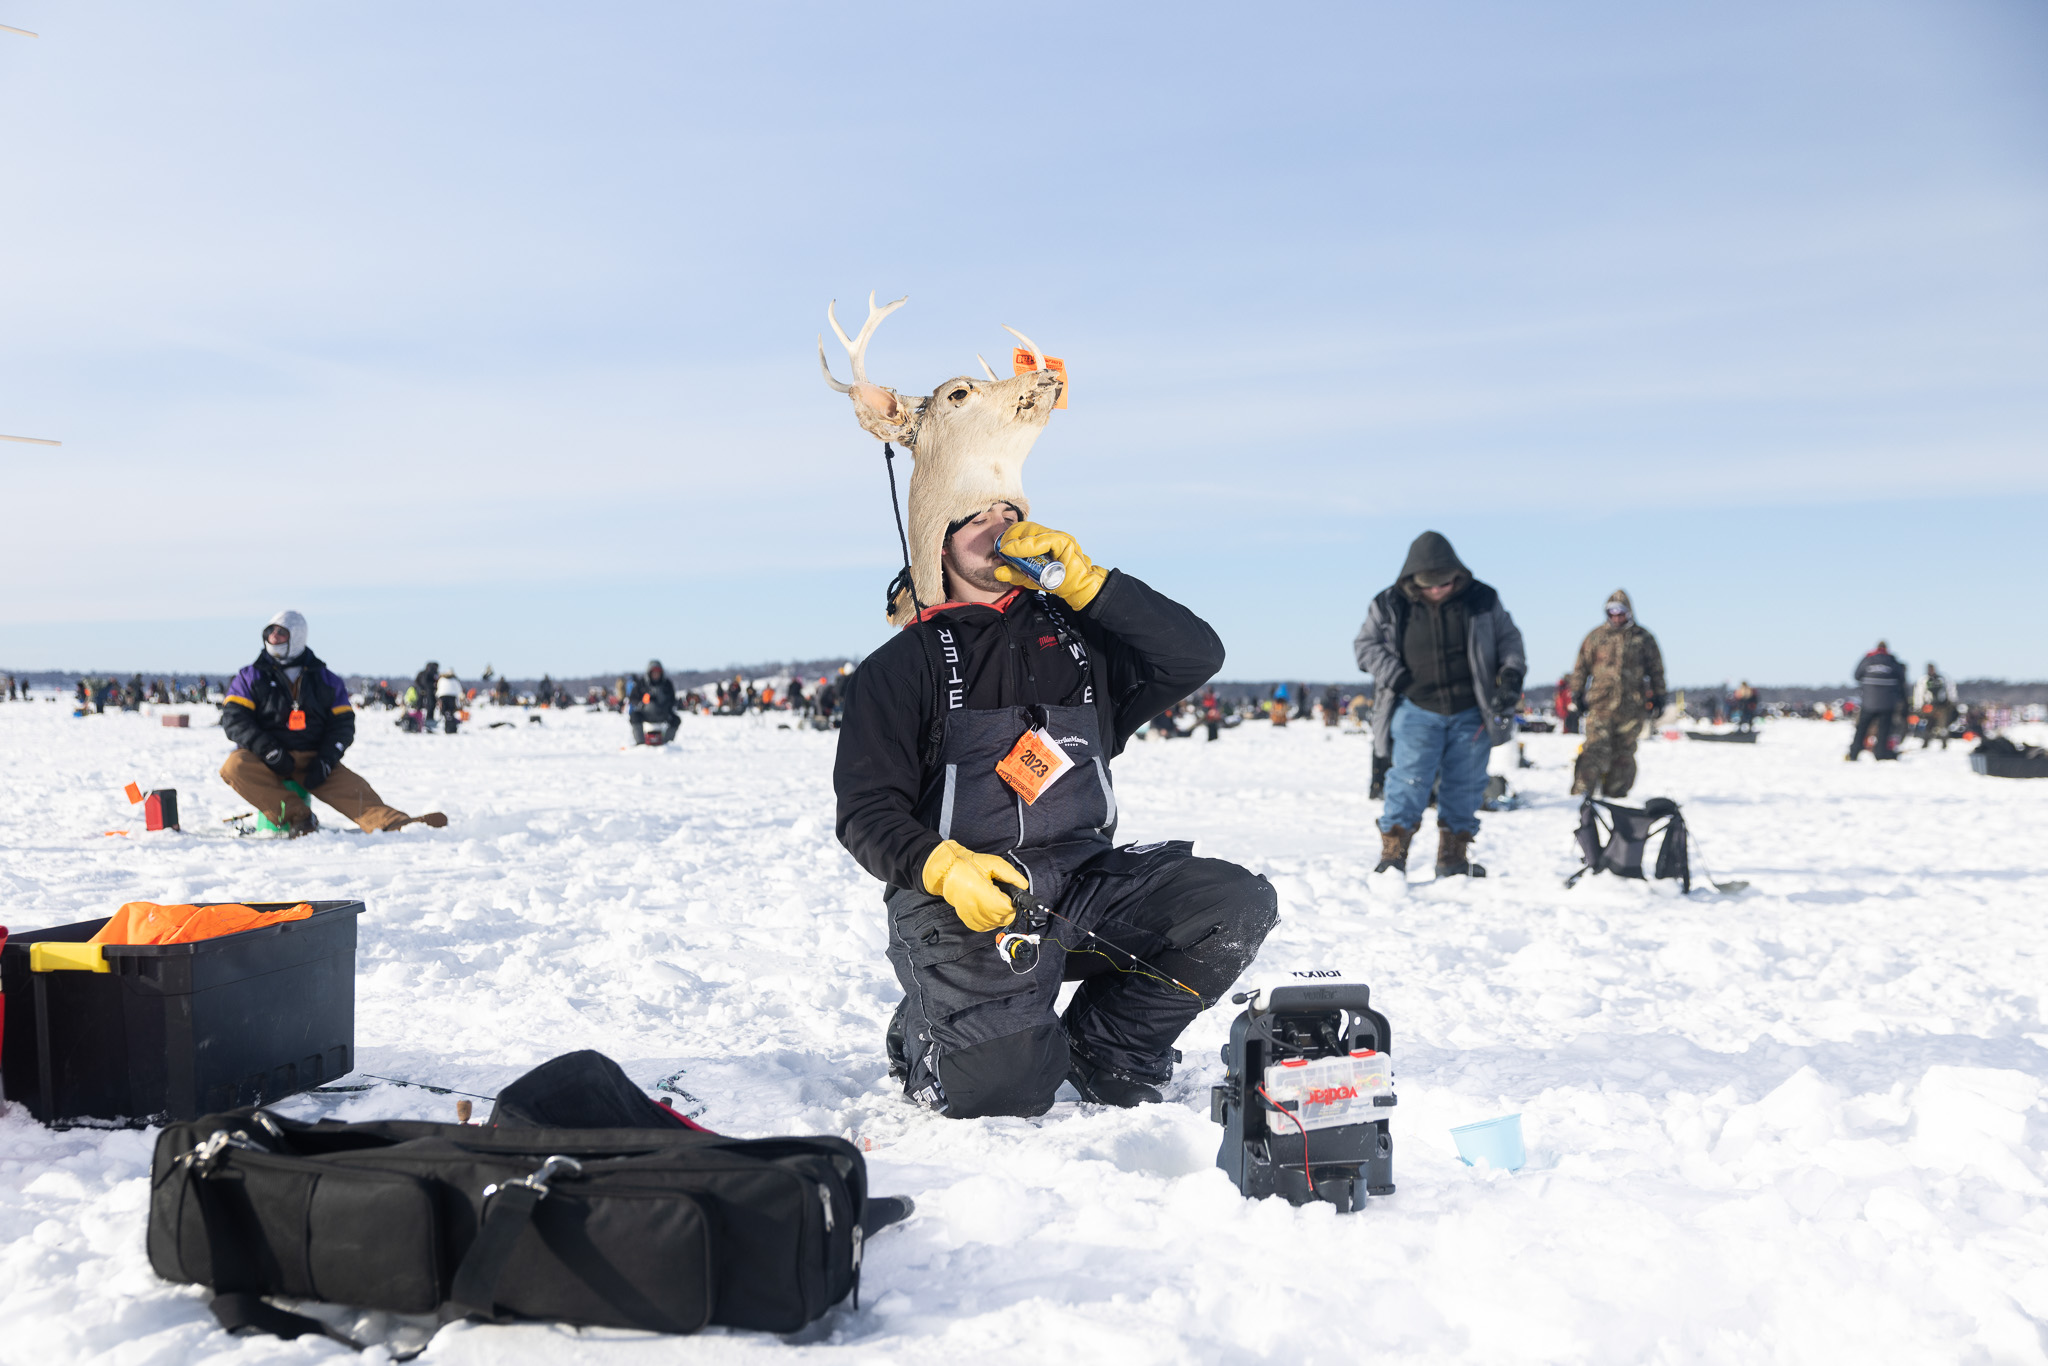 An ice fisherman drinks an energy drink while jigging an ice hole at the ice fishing extravaganza.